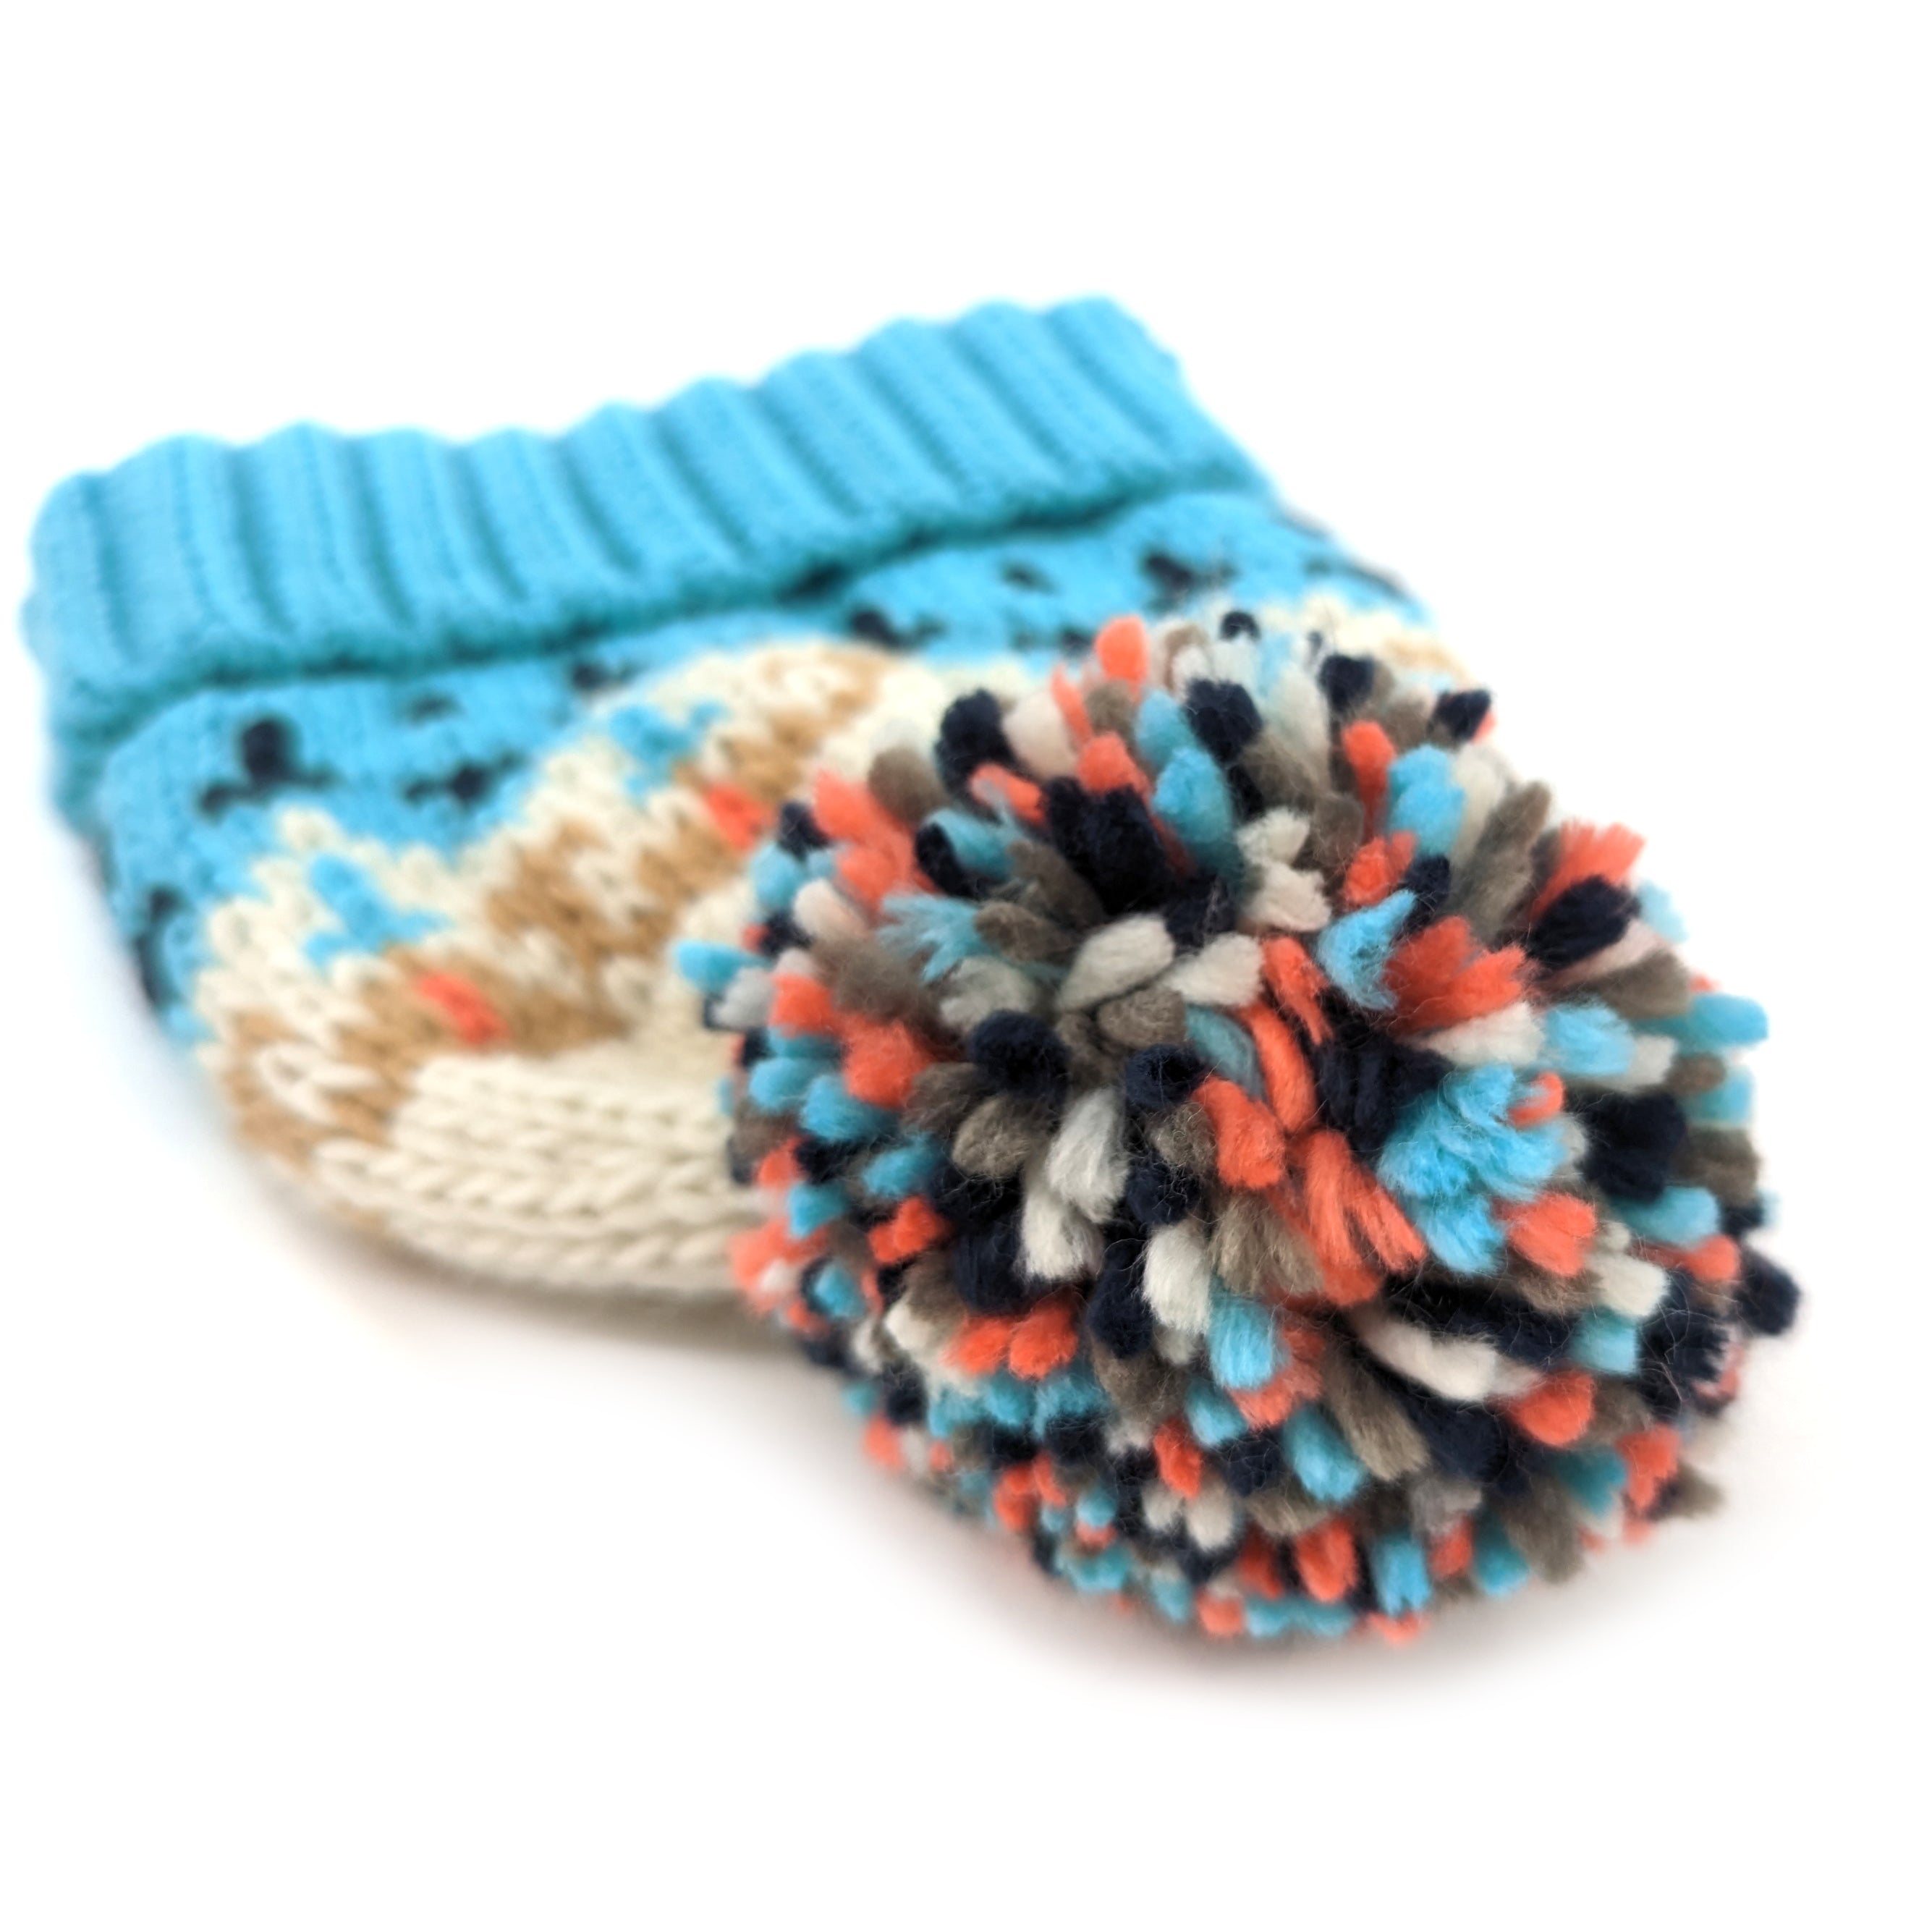 Snowy Mountain PomPom Hat - Turquoise